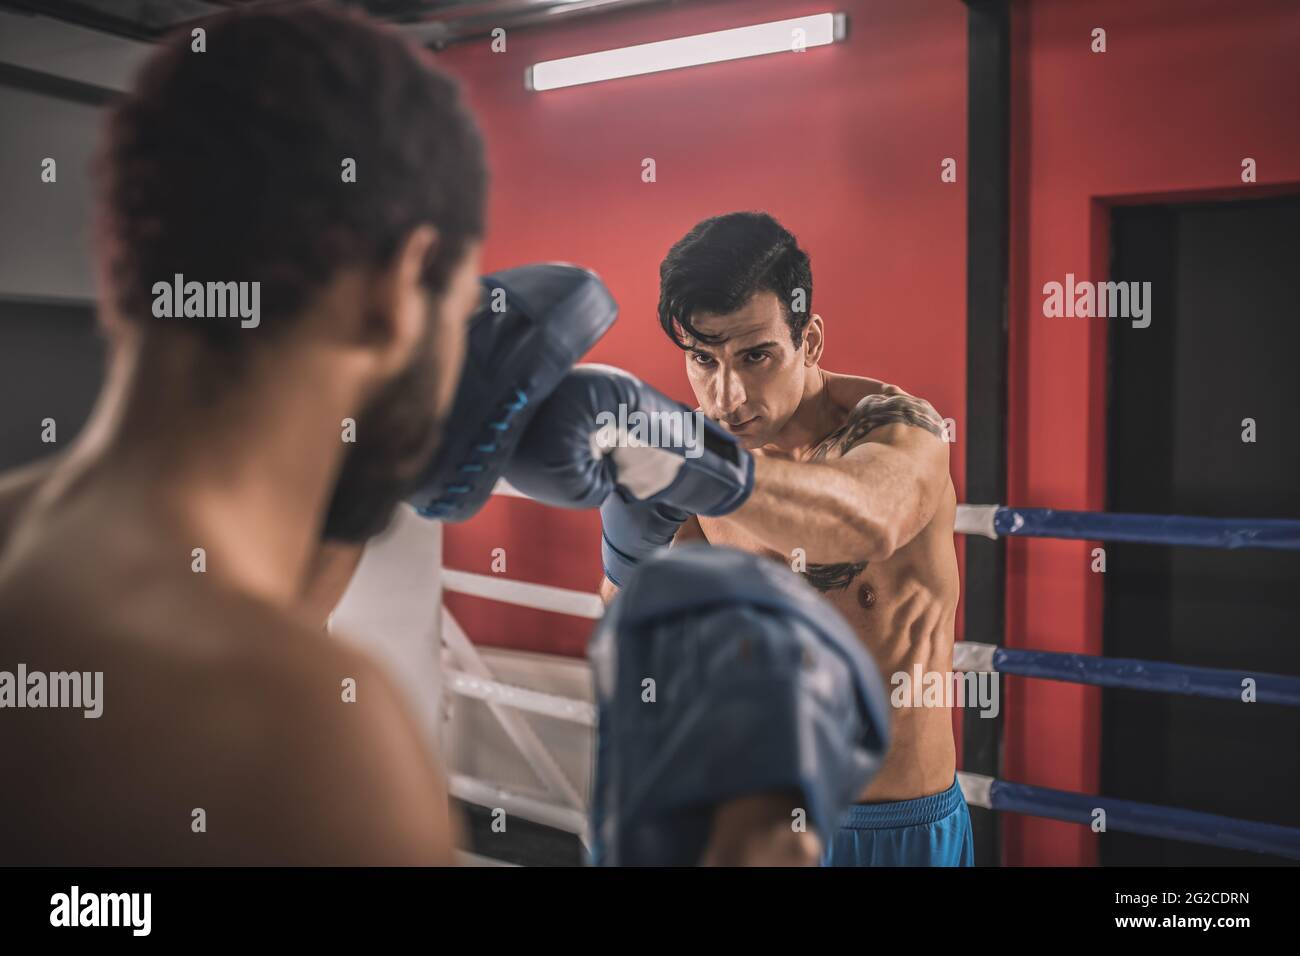 Young men fighting on a boxing ring and looking determined Stock Photo